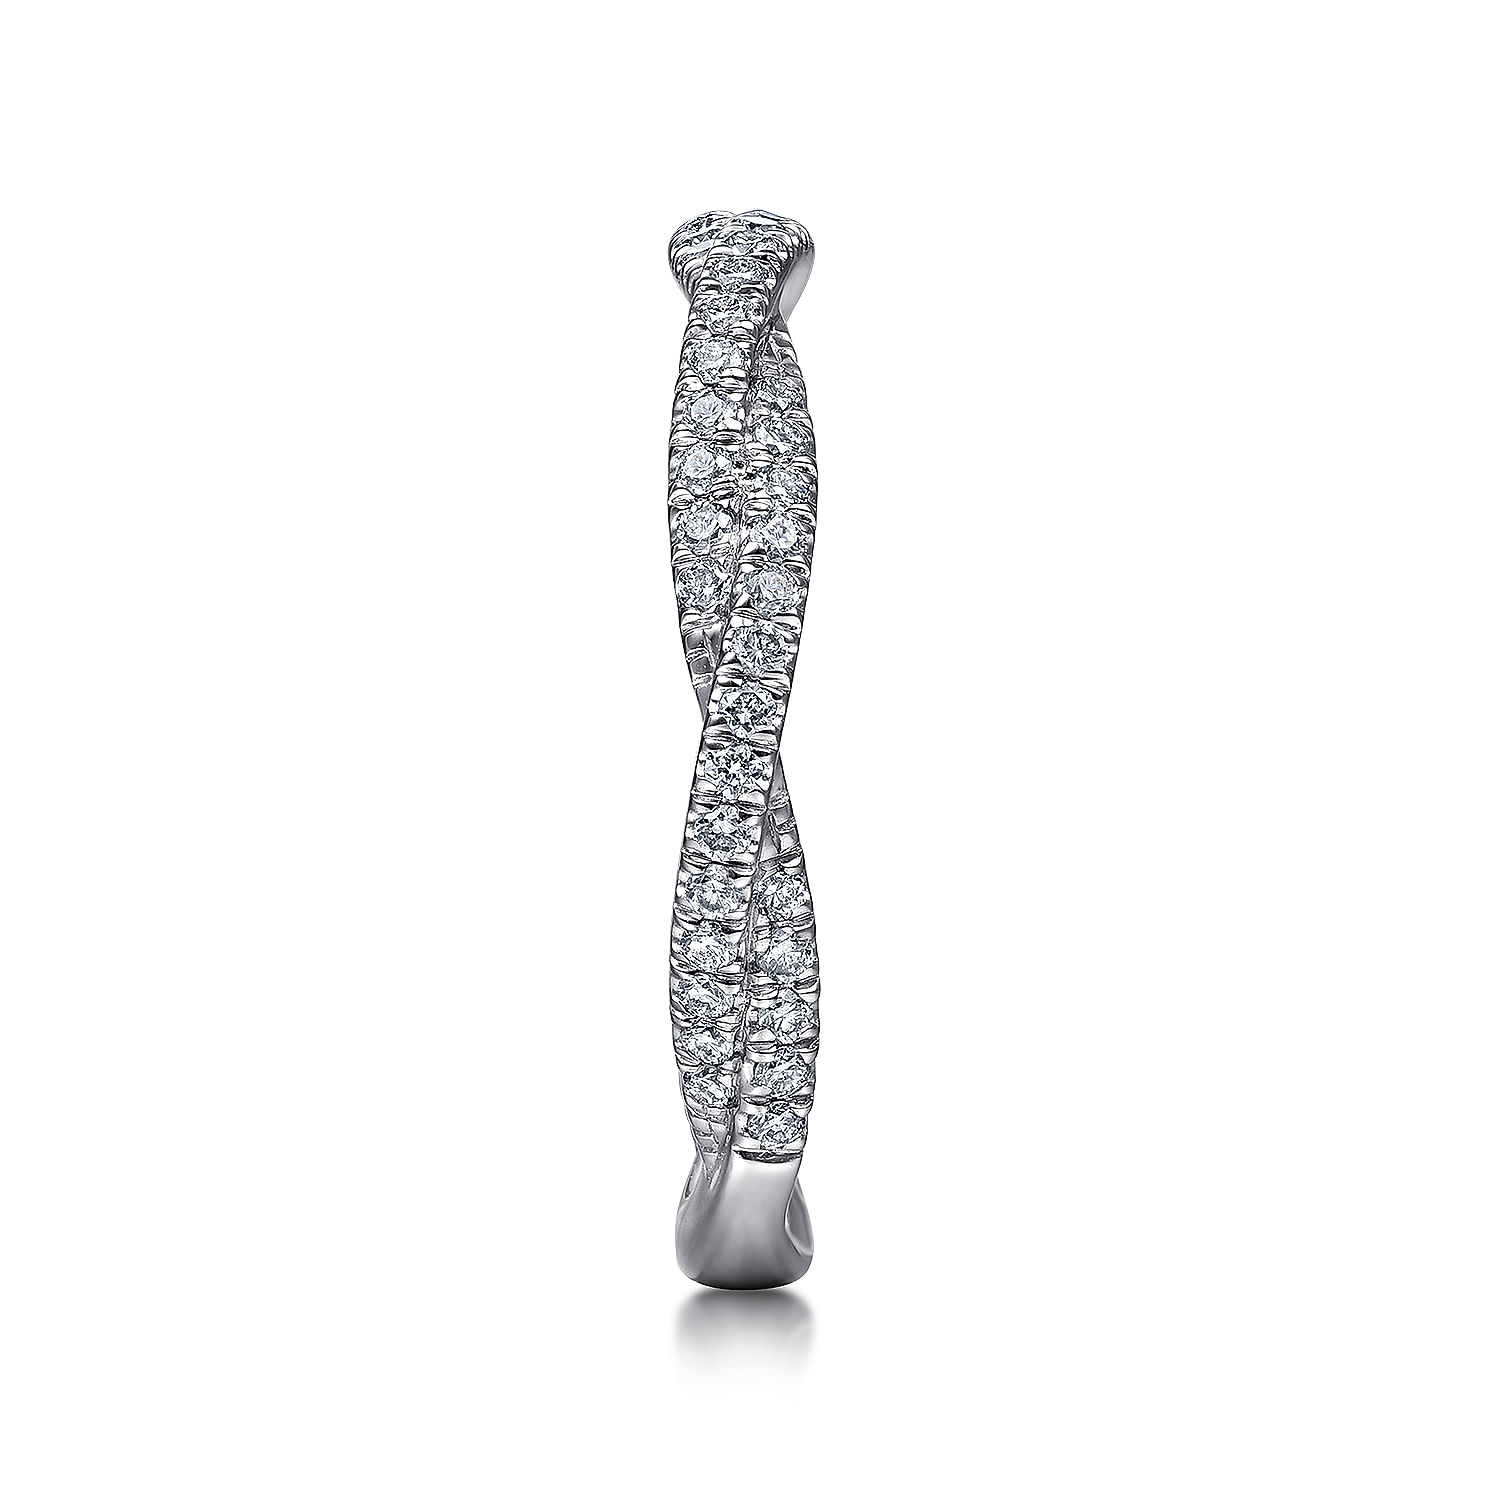 14K White Gold Diamond Pavé Twisted Stackable Band